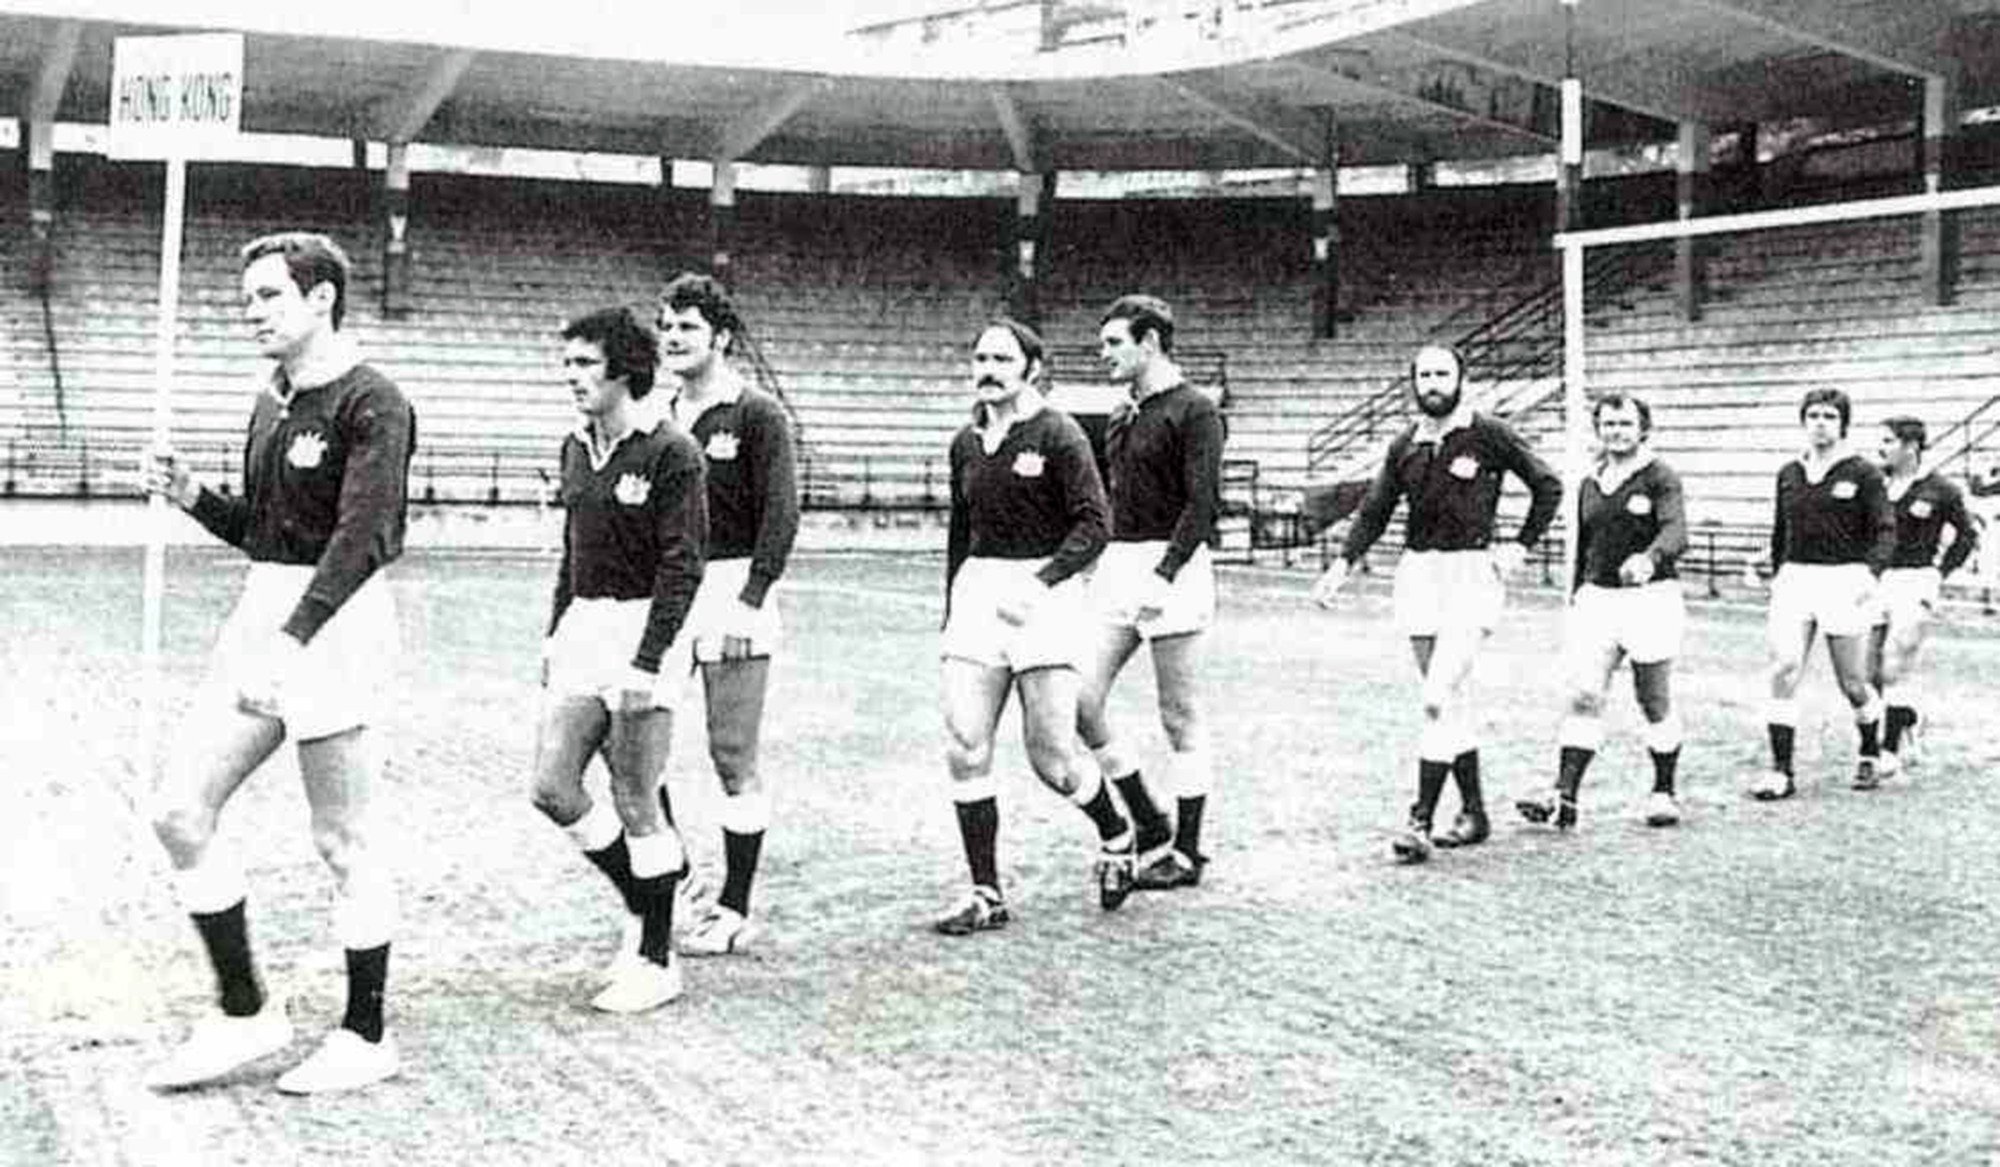 Hong Kong players are introduced at the first Sevens in 1976. Photo: HKRFU